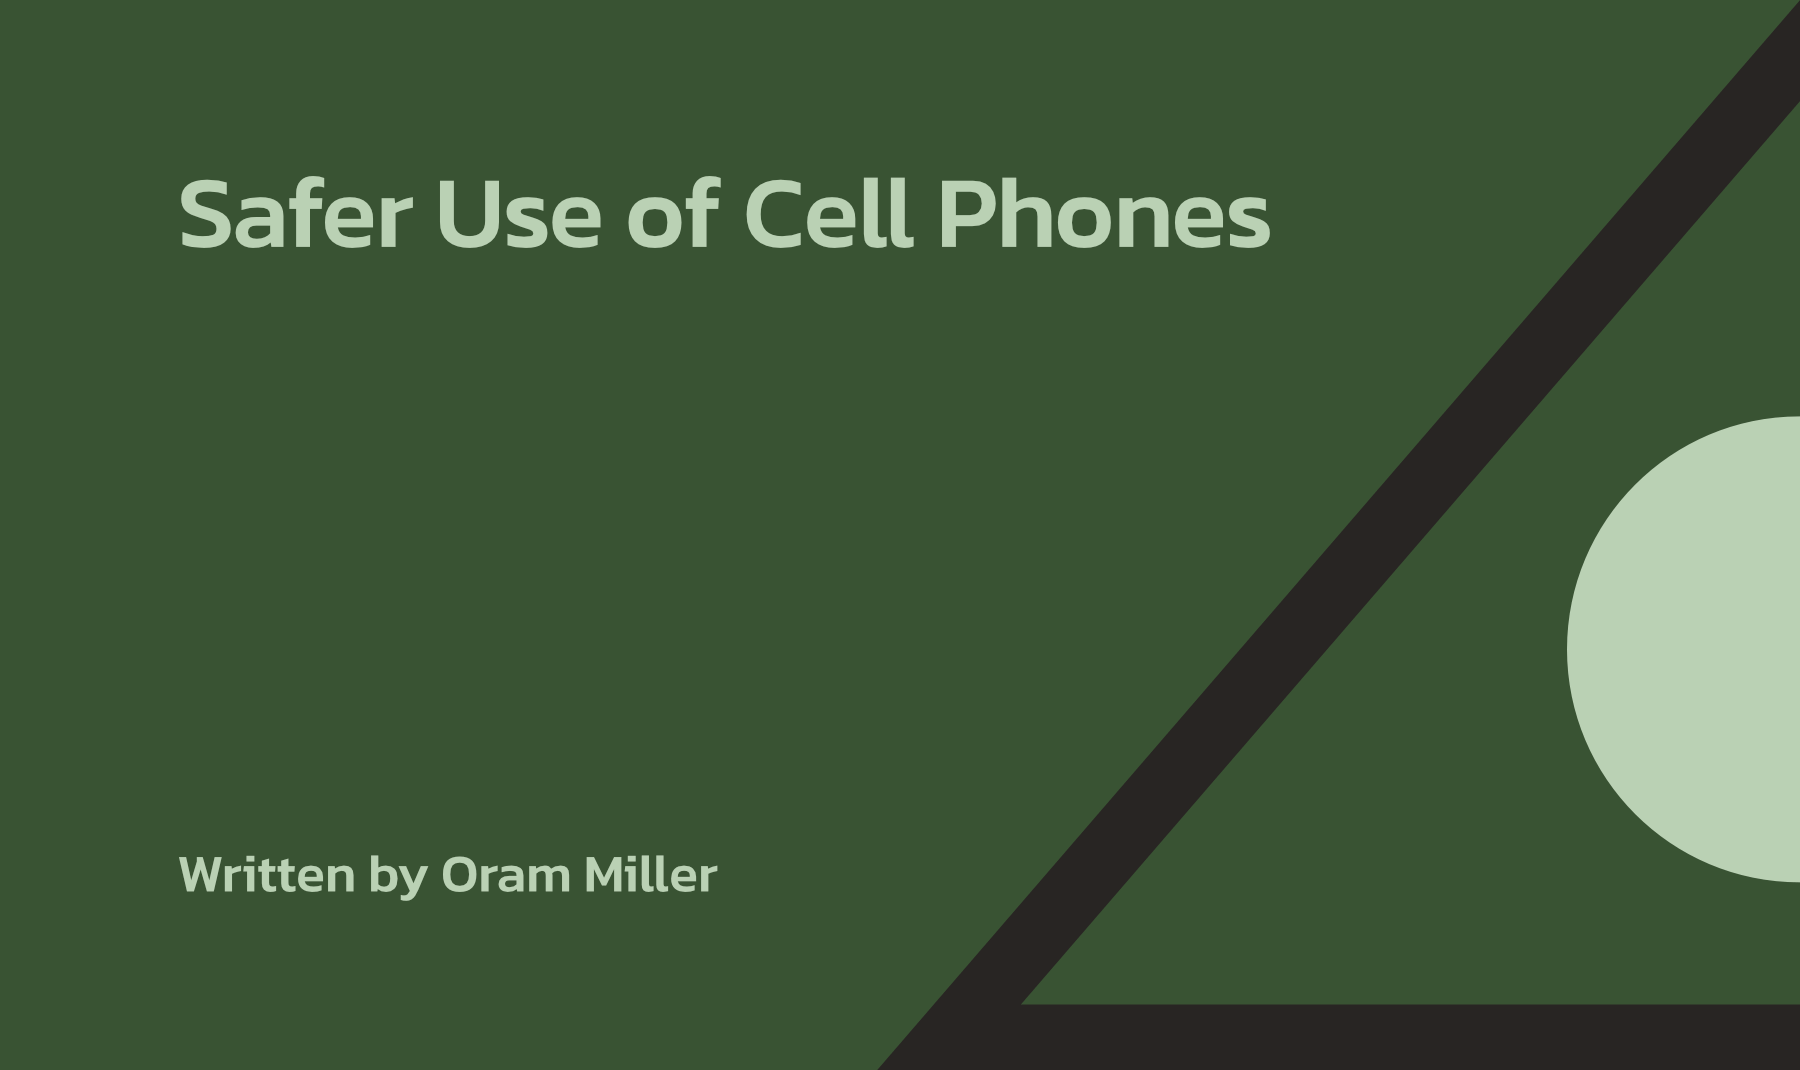 Safer Use of Cell Phones